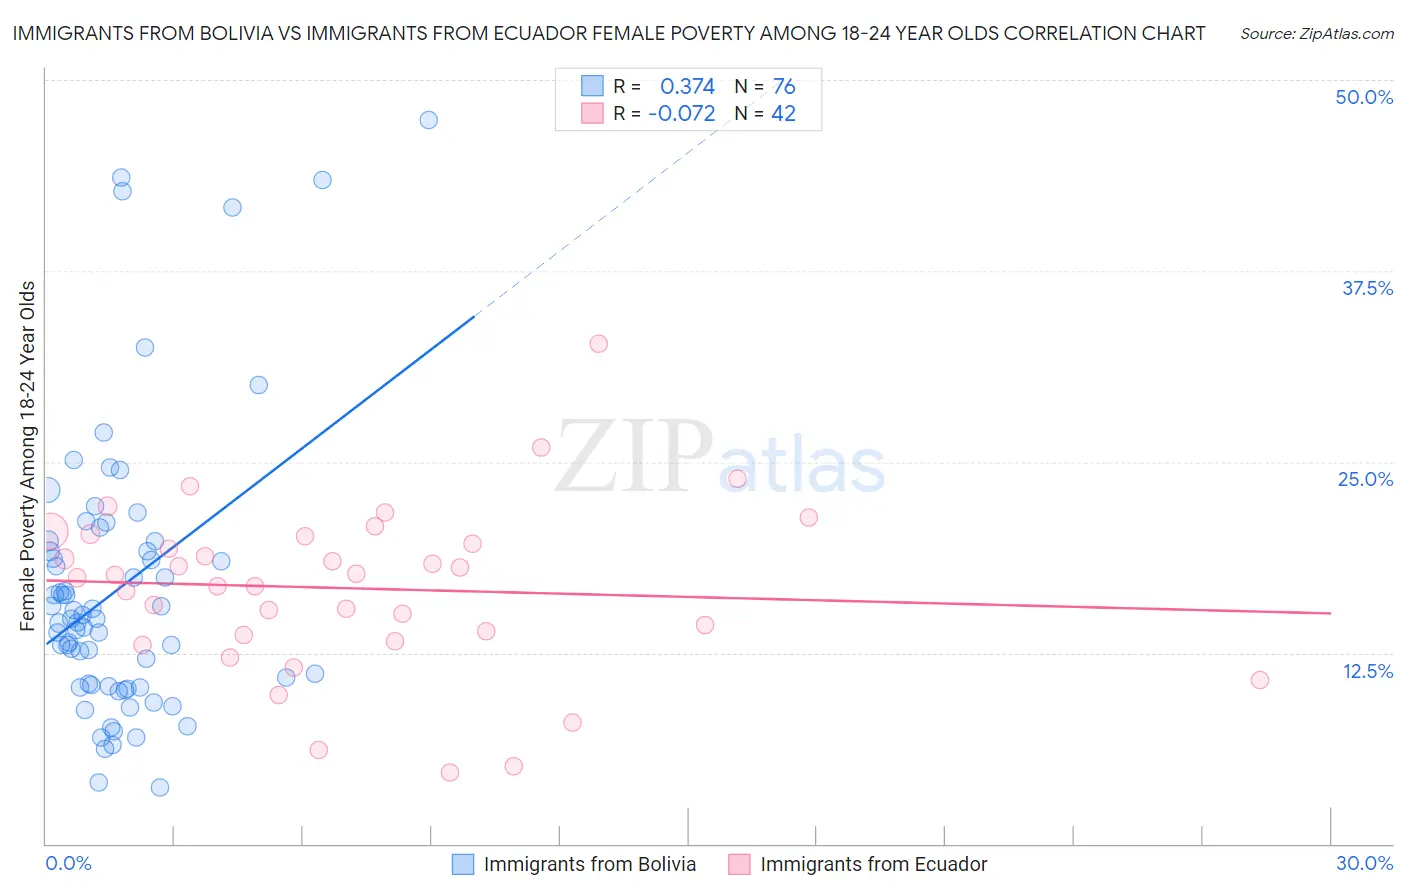 Immigrants from Bolivia vs Immigrants from Ecuador Female Poverty Among 18-24 Year Olds